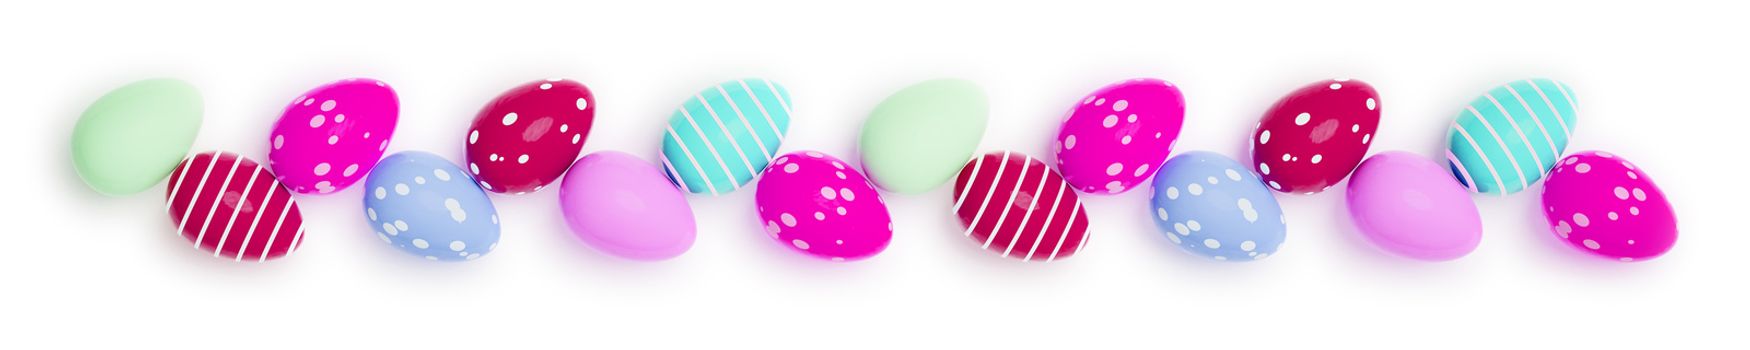 3d illustration of a row of colored easter eggs